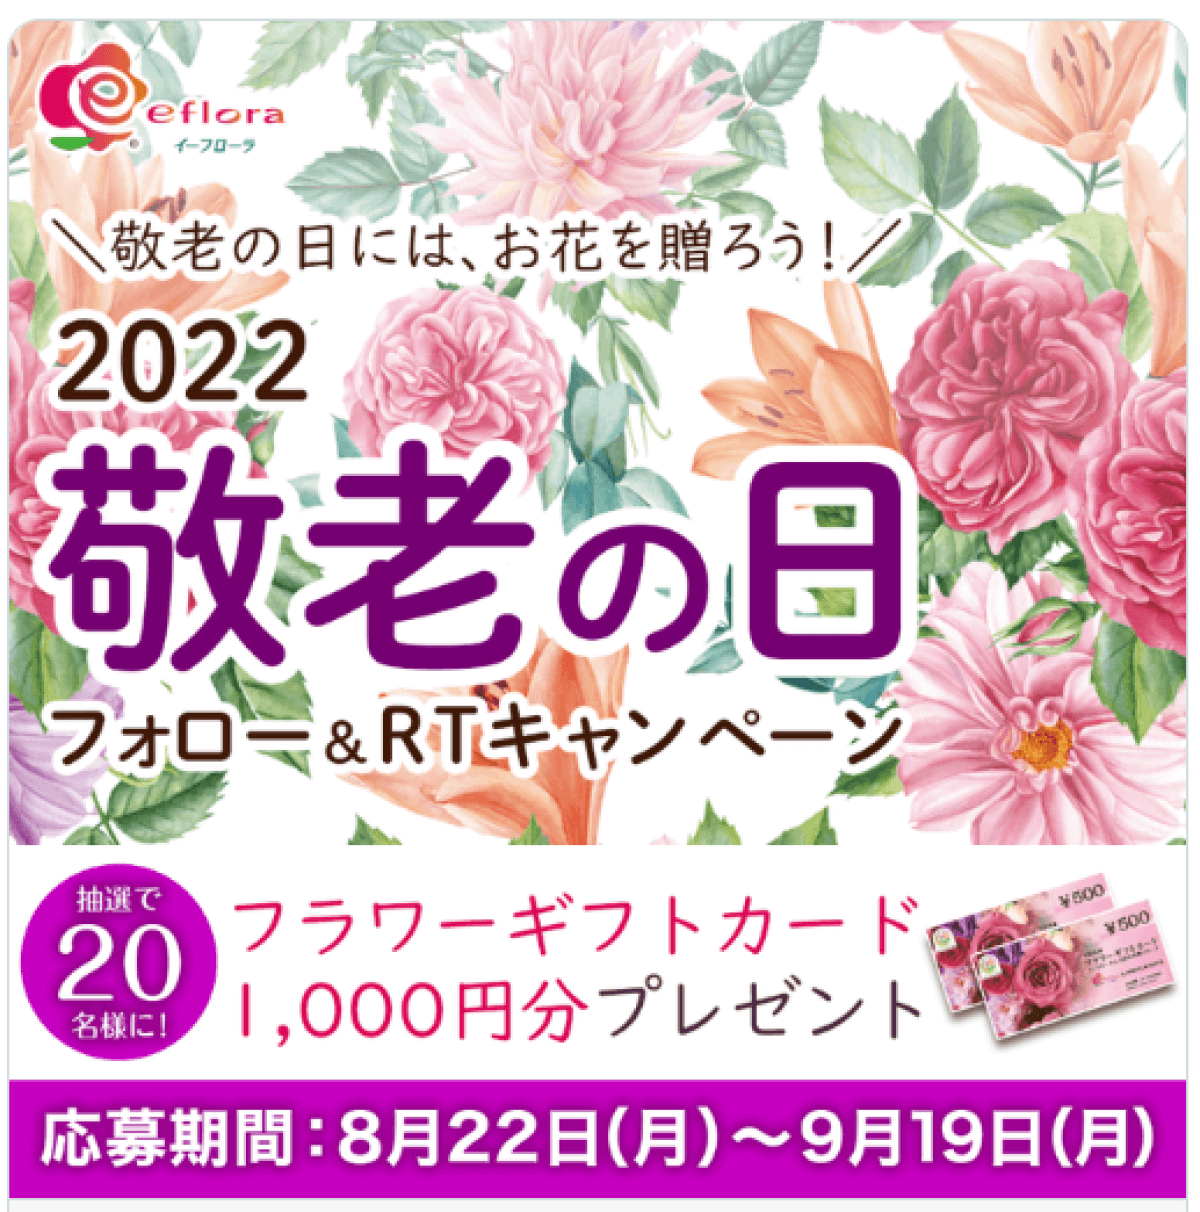 twitter-campaign-eflora-official